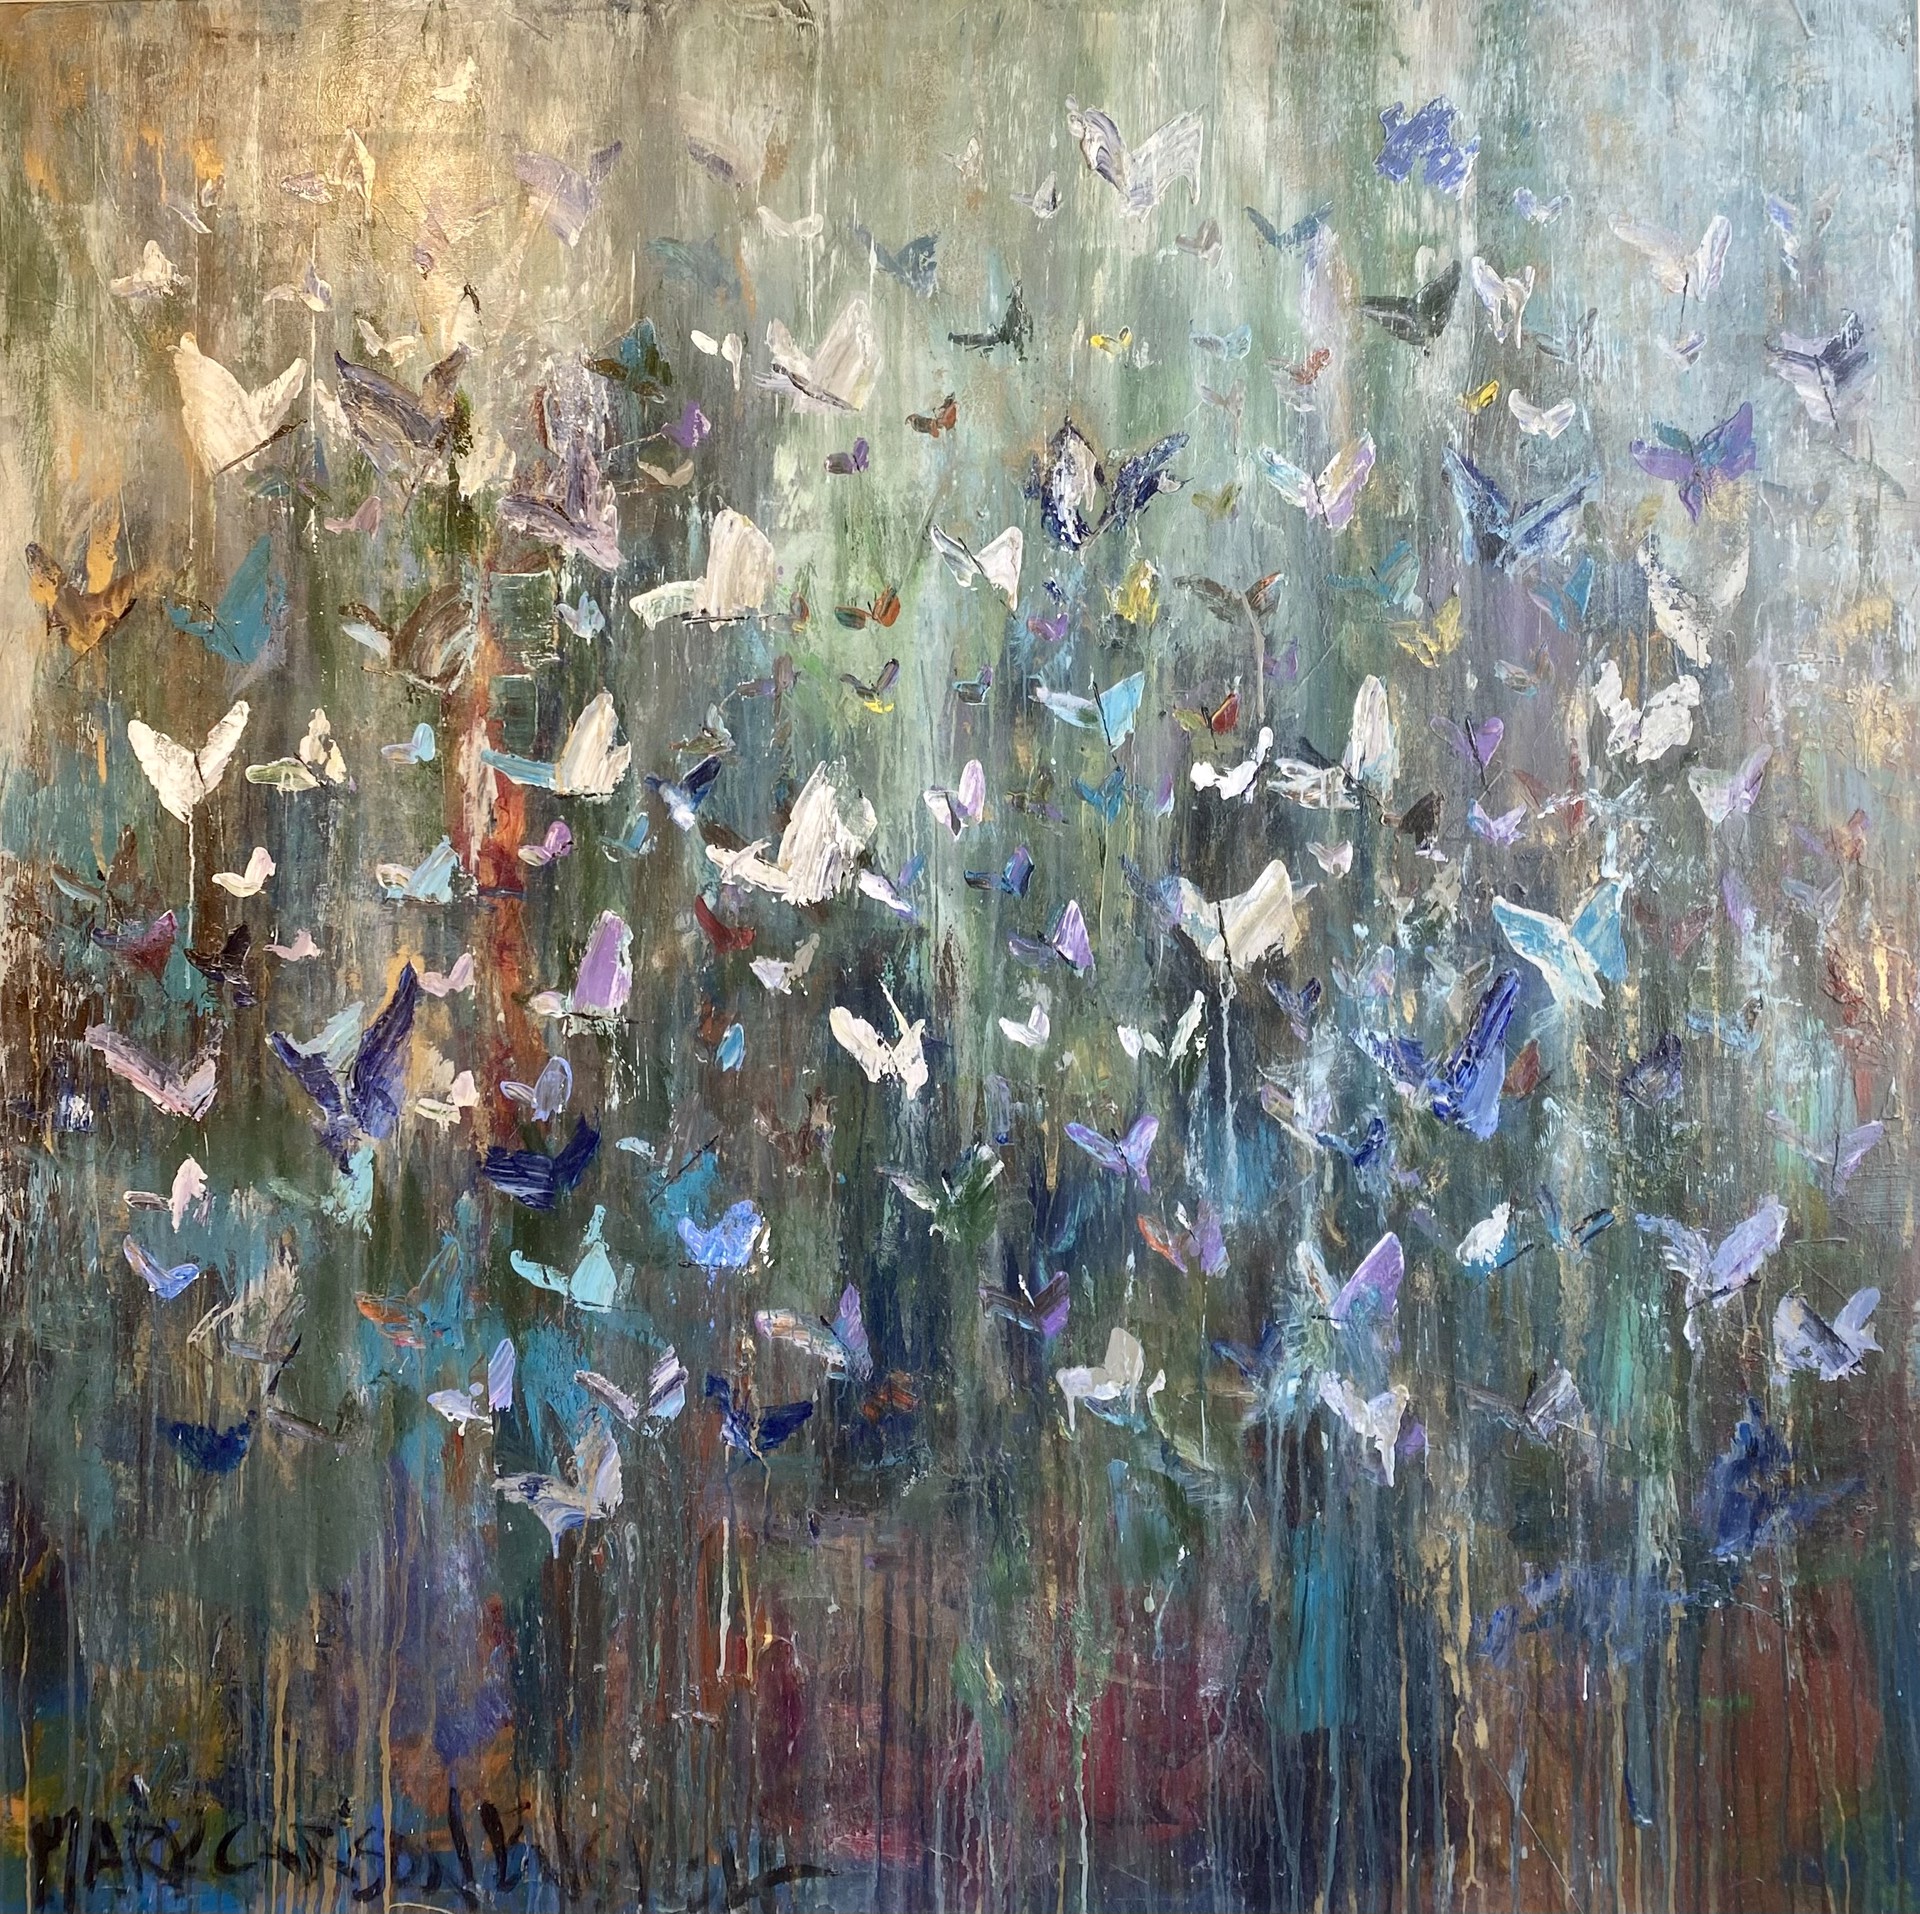 Inverted Butterflies by Mark Carson English